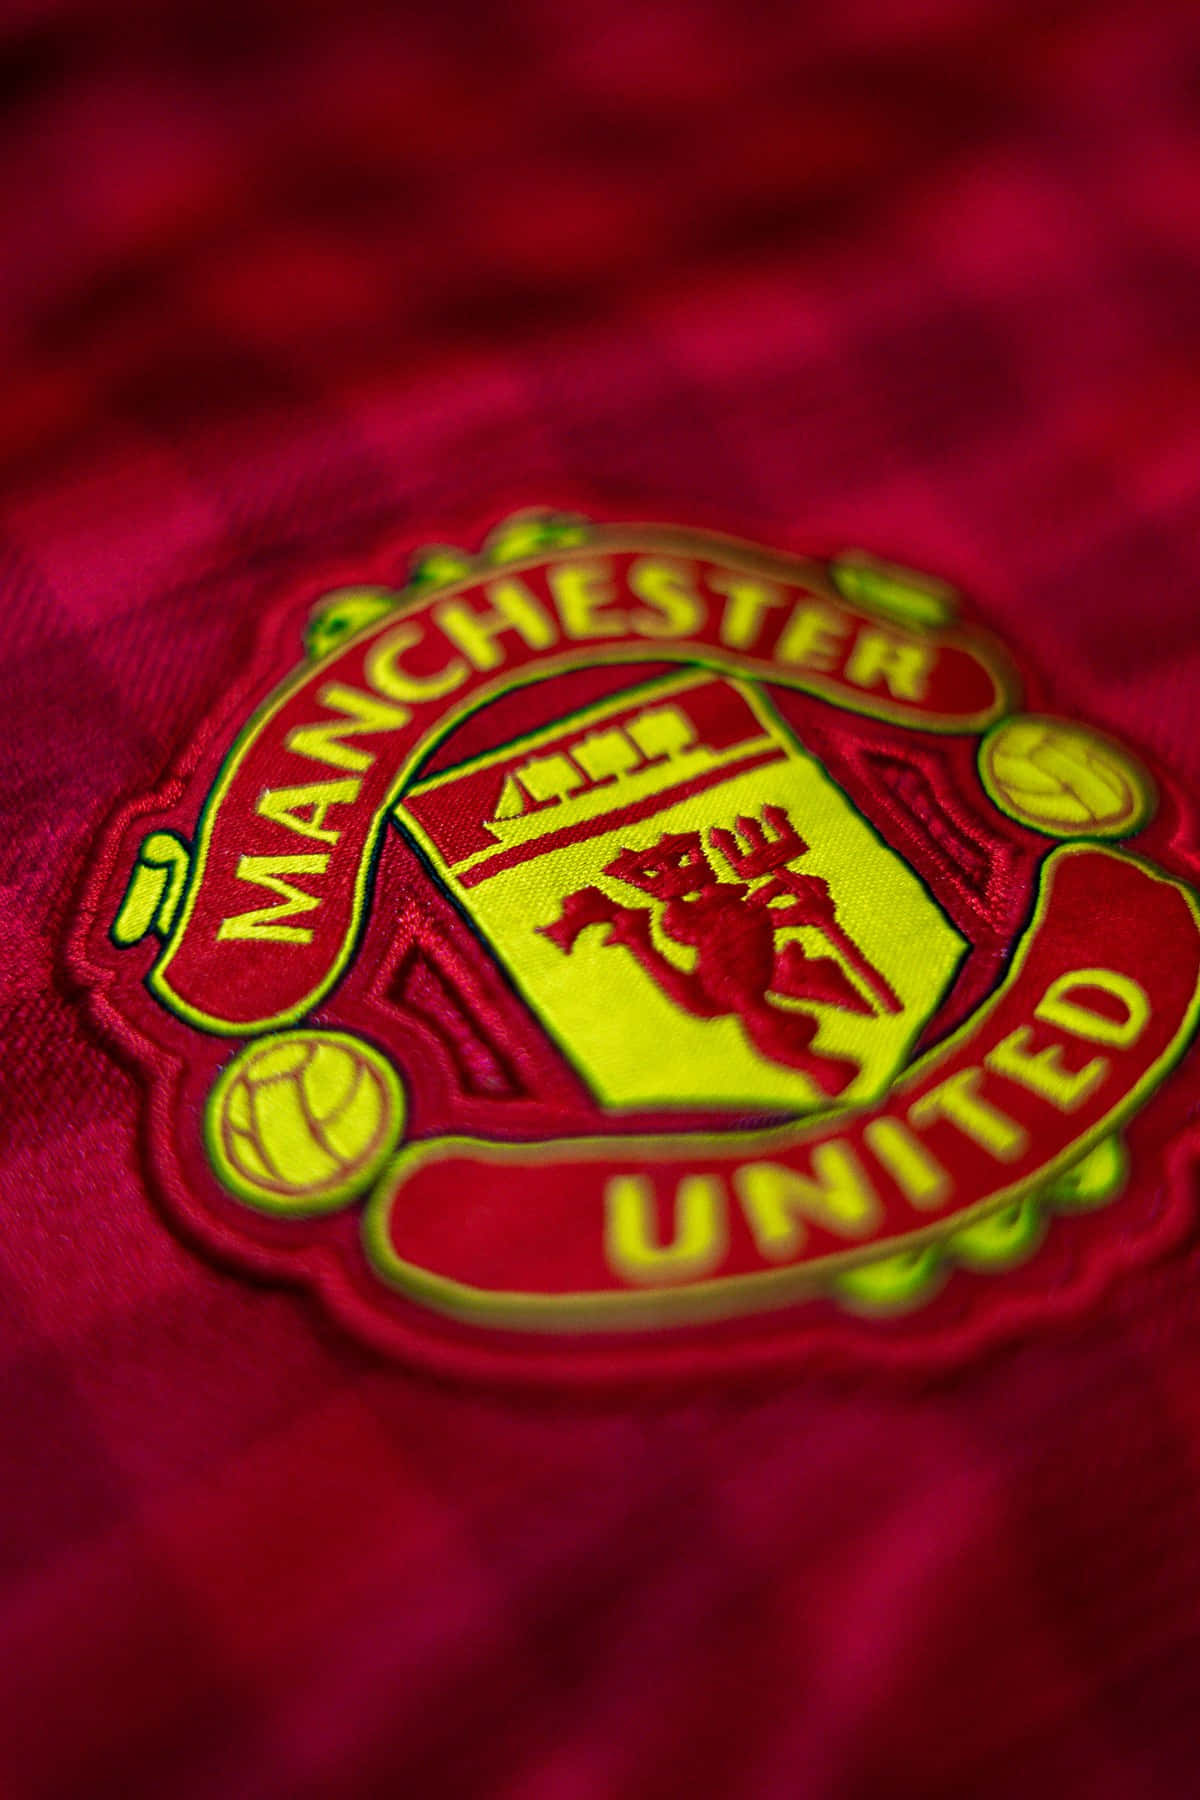 Show Your Support: Rock The Manchester United Wallpaper On Your Iphone Wallpaper